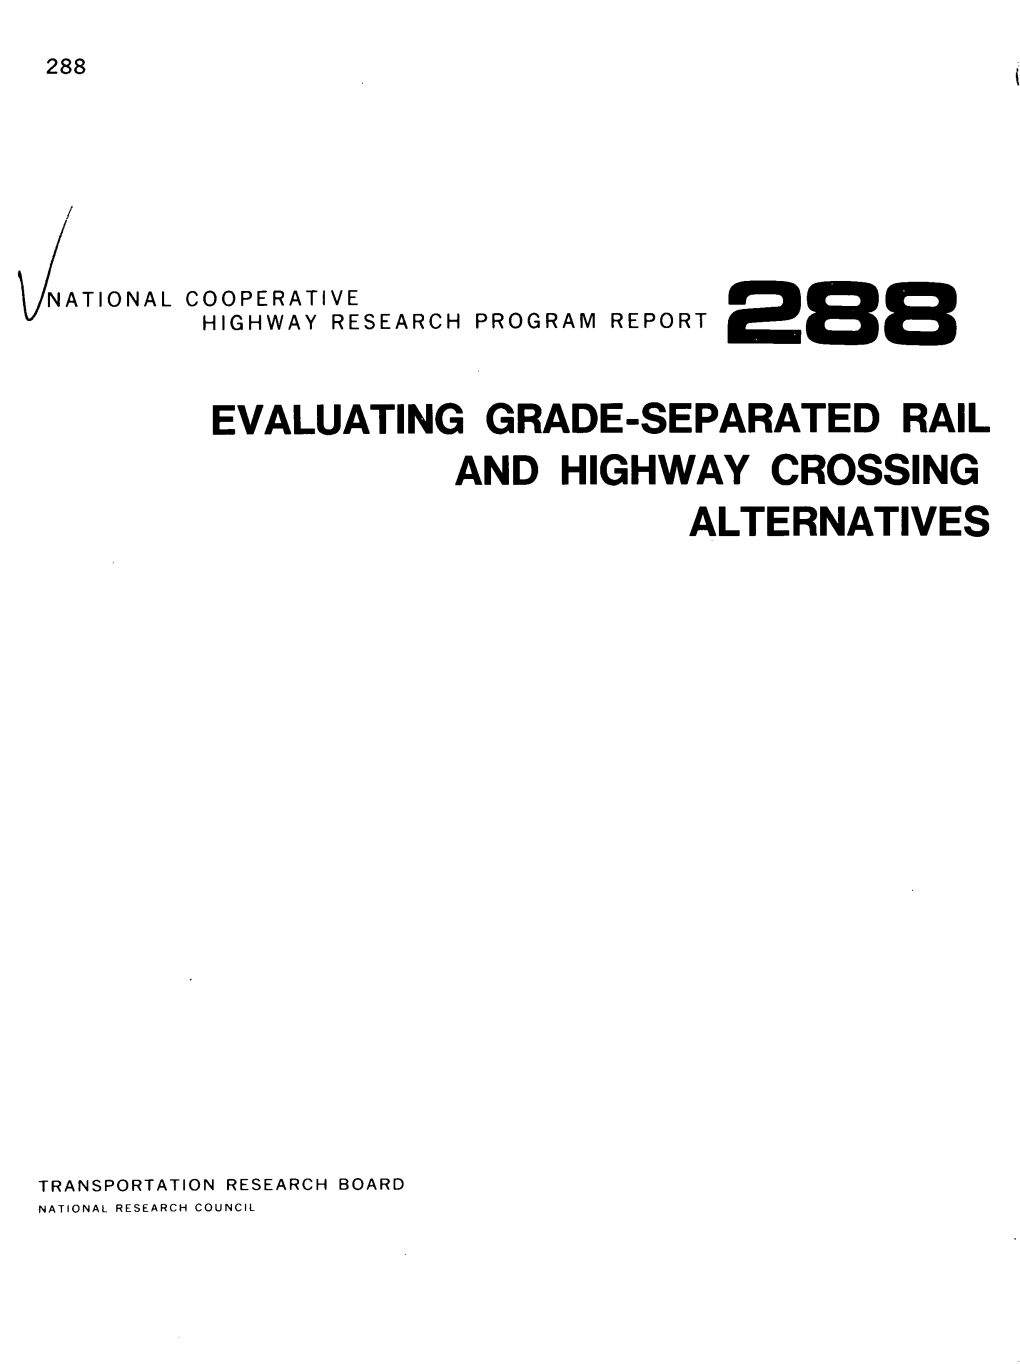 Evaluating Grade-Separated Rail and Highway Crossing Alternatives